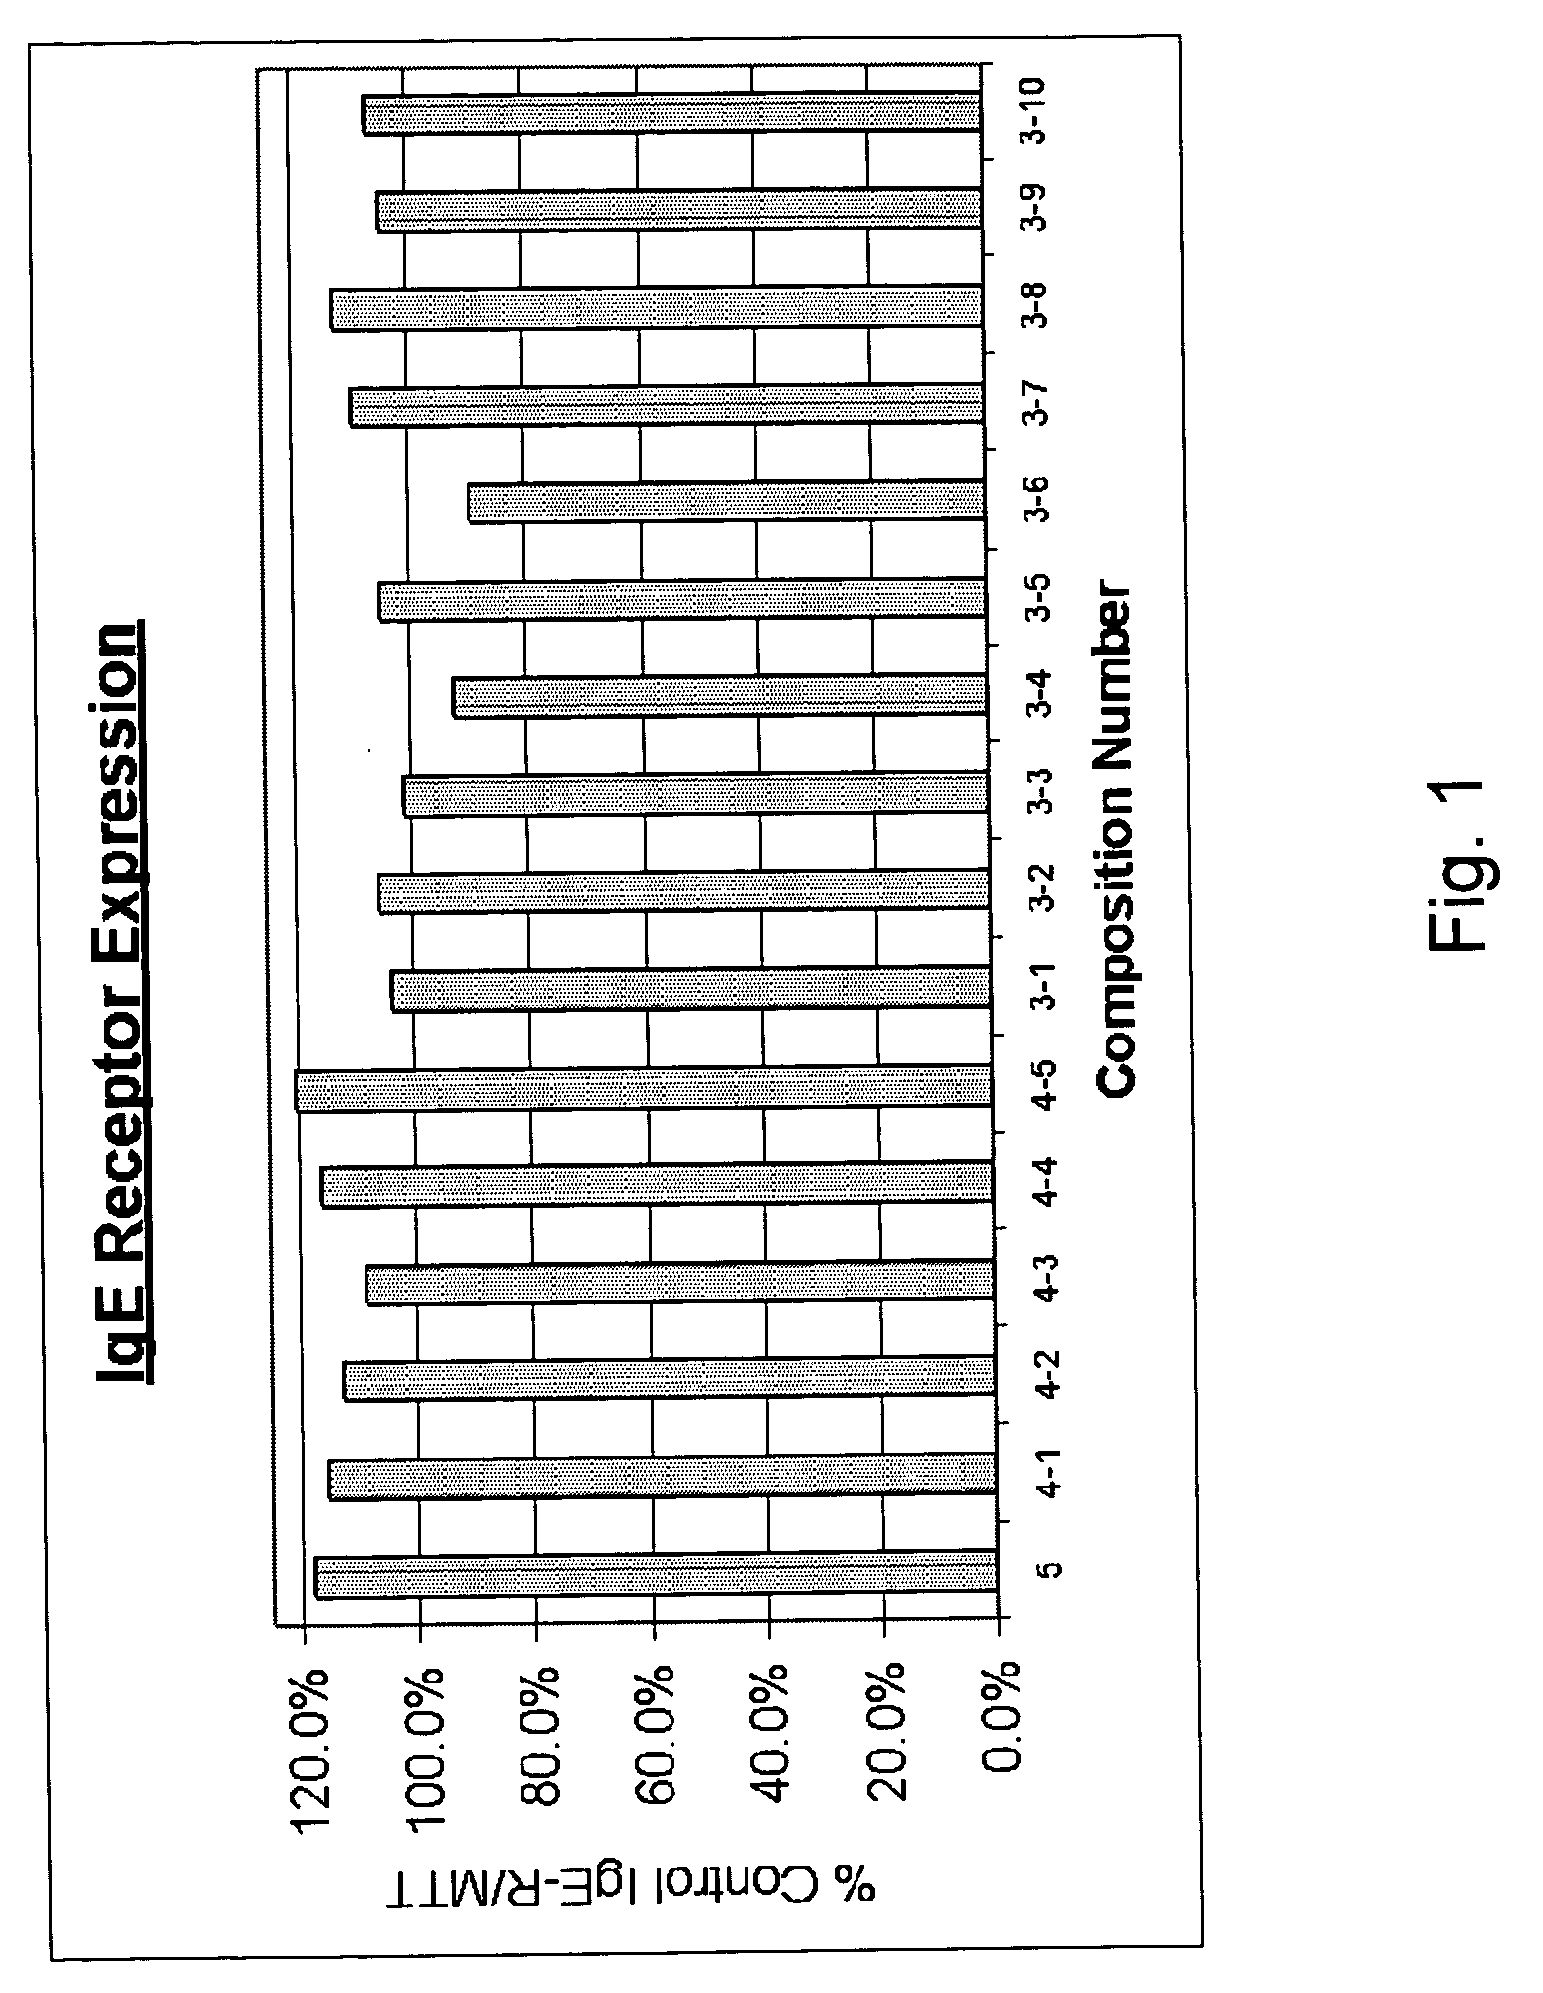 Anti-allergy composition and related method